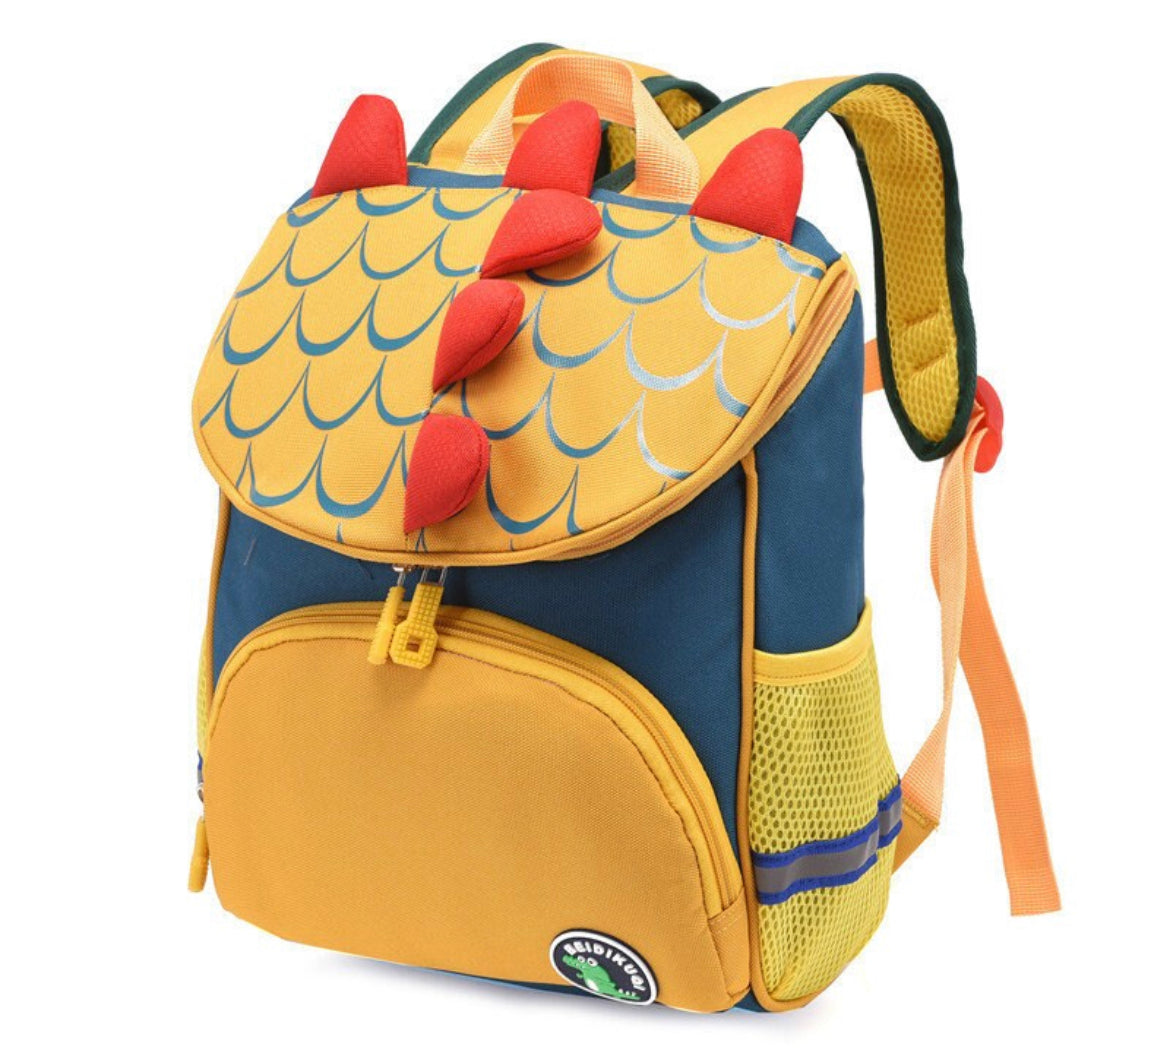 Personalized Embroidered Dinosaur Backpack